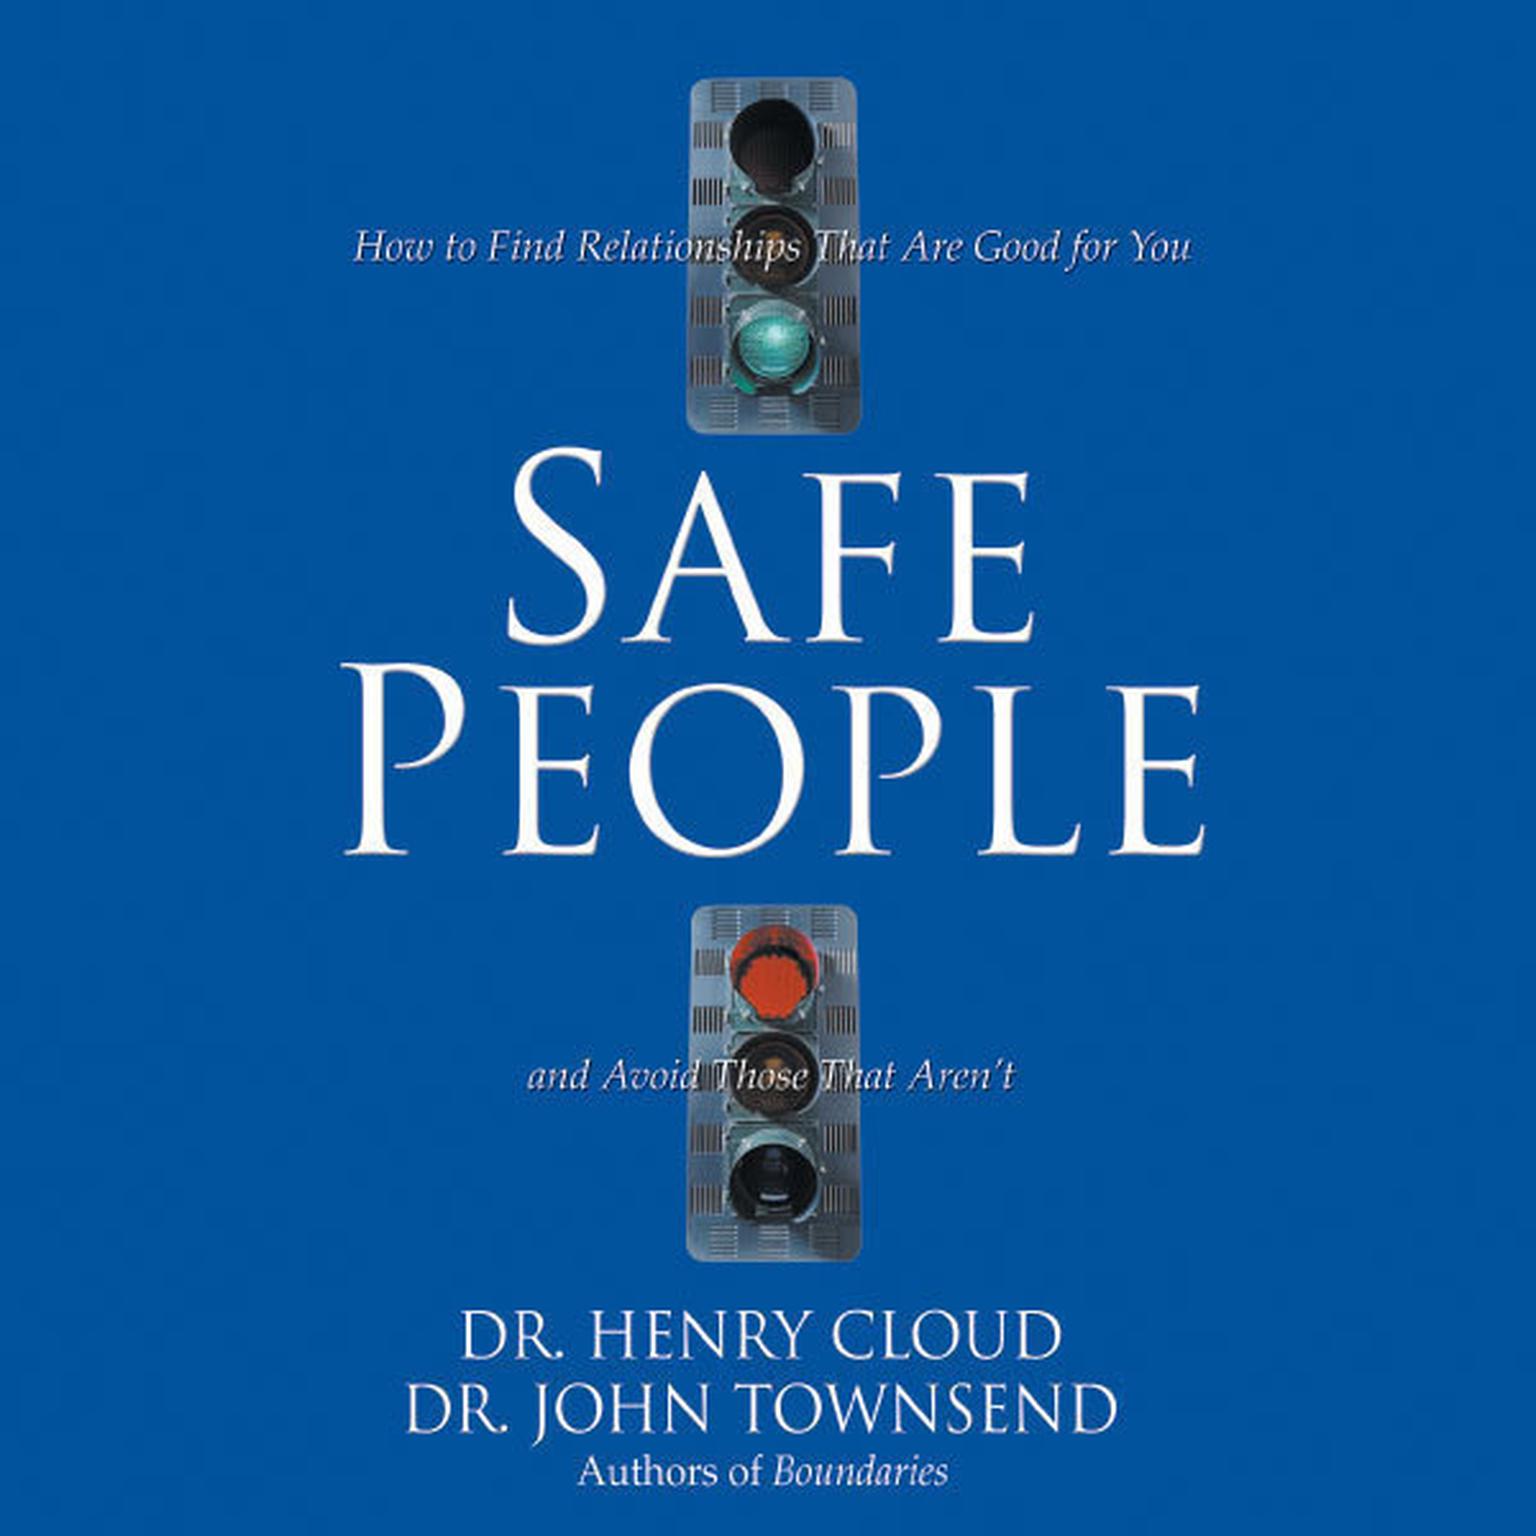 Safe People (Abridged): How to Find Relationships That Are Good for You and Avoid Those That Arent Audiobook, by Henry Cloud